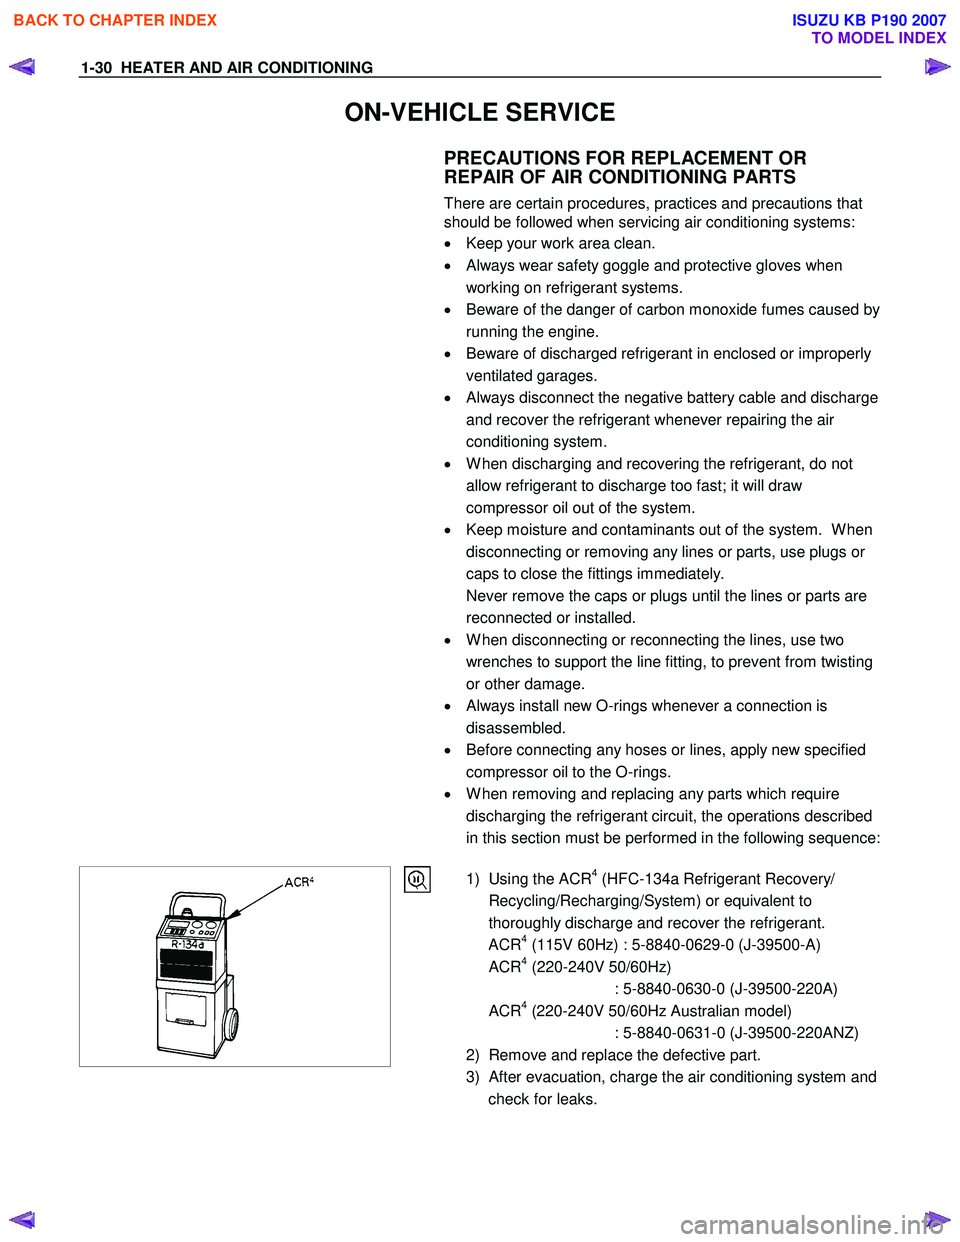 ISUZU KB P190 2007  Workshop Repair Manual 1-30  HEATER AND AIR CONDITIONING 
ON-VEHICLE SERVICE 
  PRECAUTIONS FOR REPLACEMENT OR  
REPAIR OF AIR CONDITIONING PARTS 
There are certain procedures, practices and precautions that  
should be fol